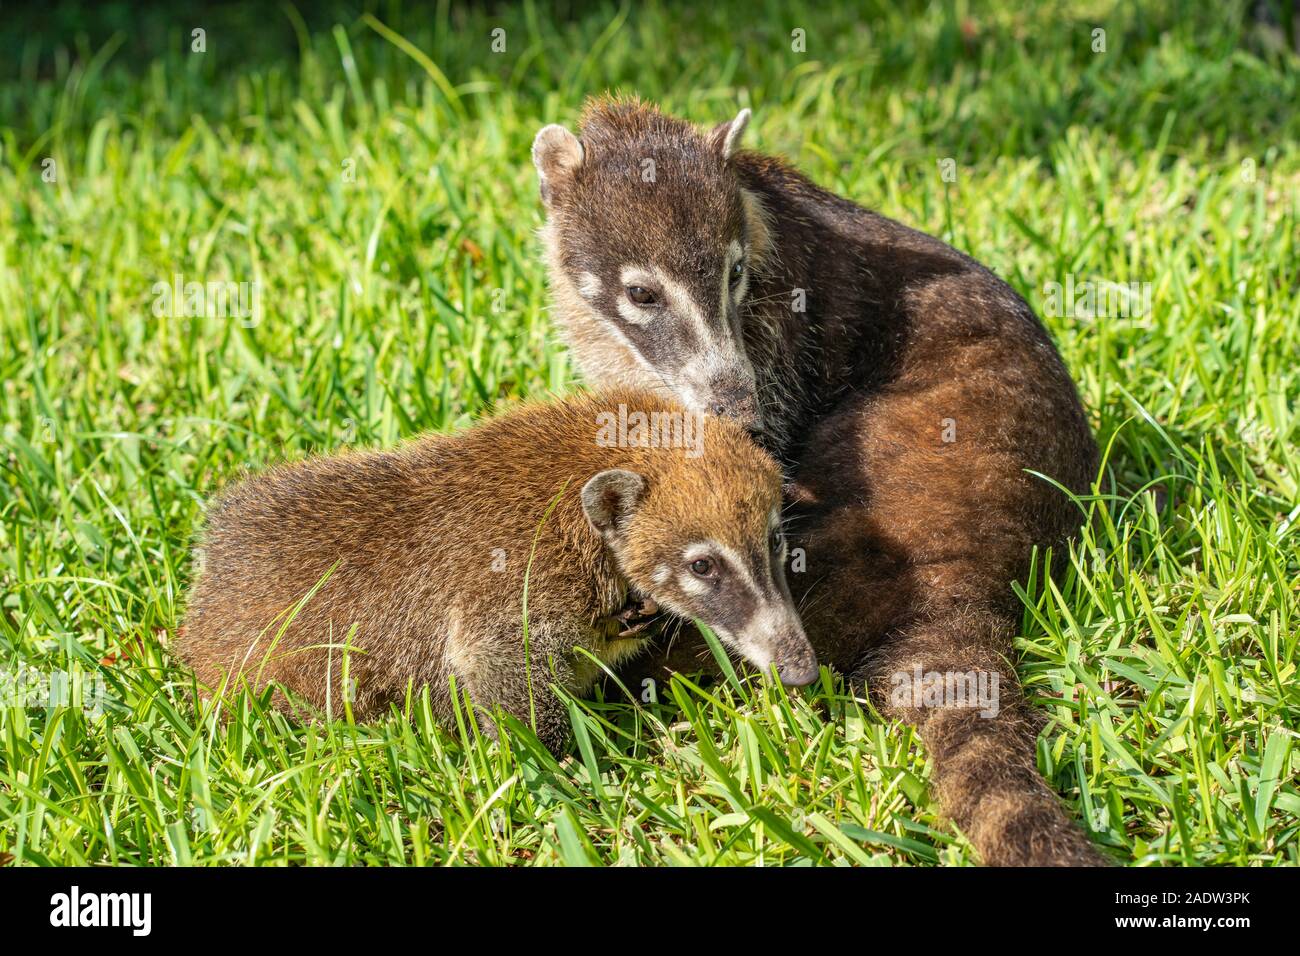 Coatis playing in grass in Mexico Stock Photo